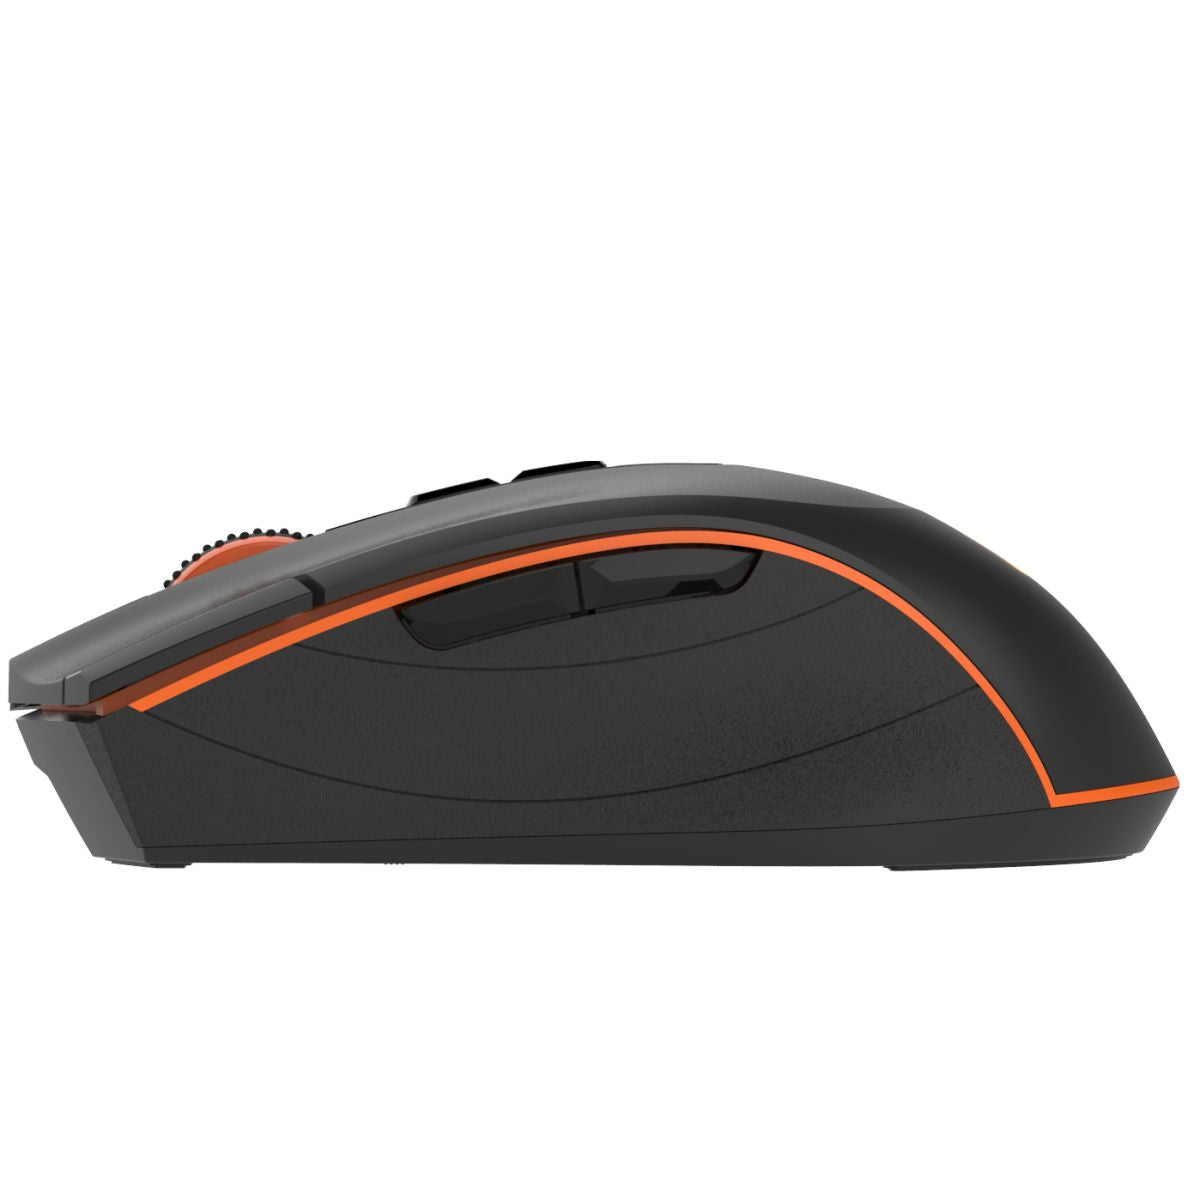 INDENA G707D Dual Mode Wireless Mouse - Hugmie